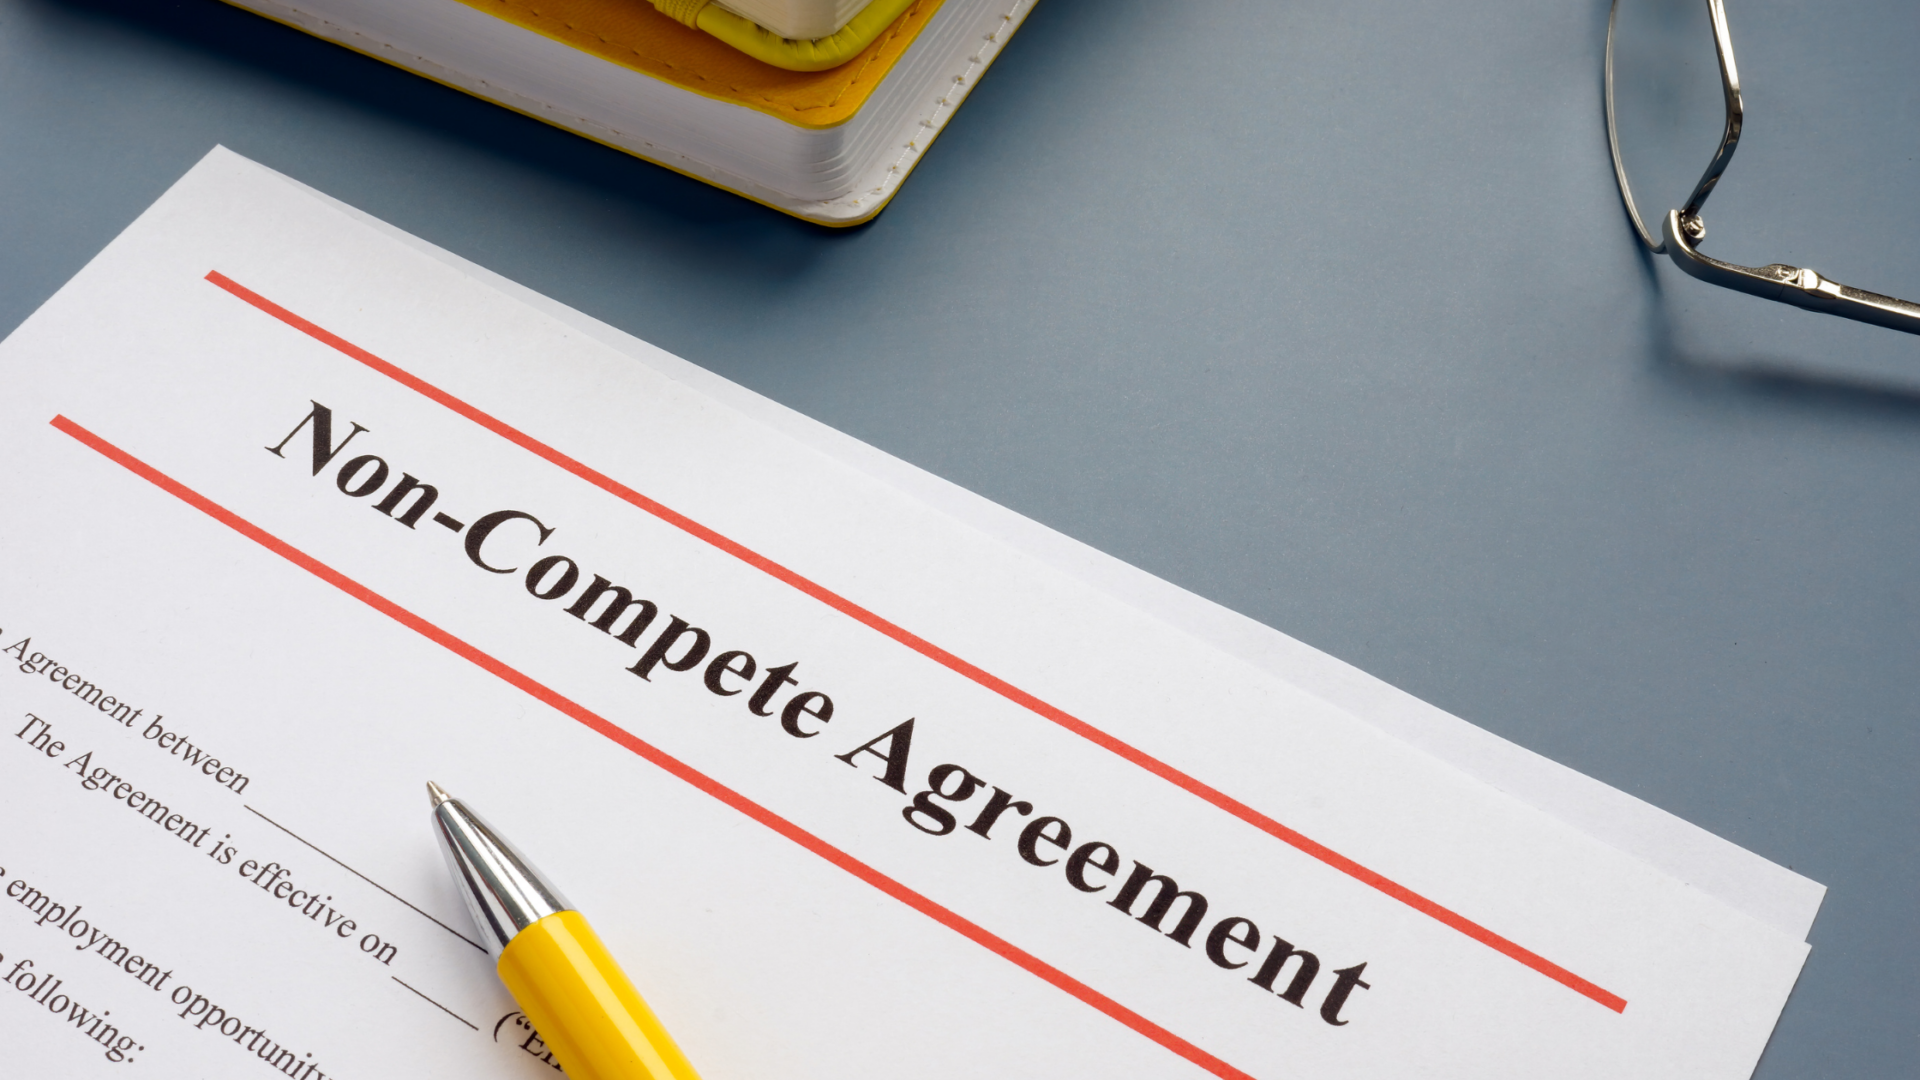 Non-compete agreements are going away.